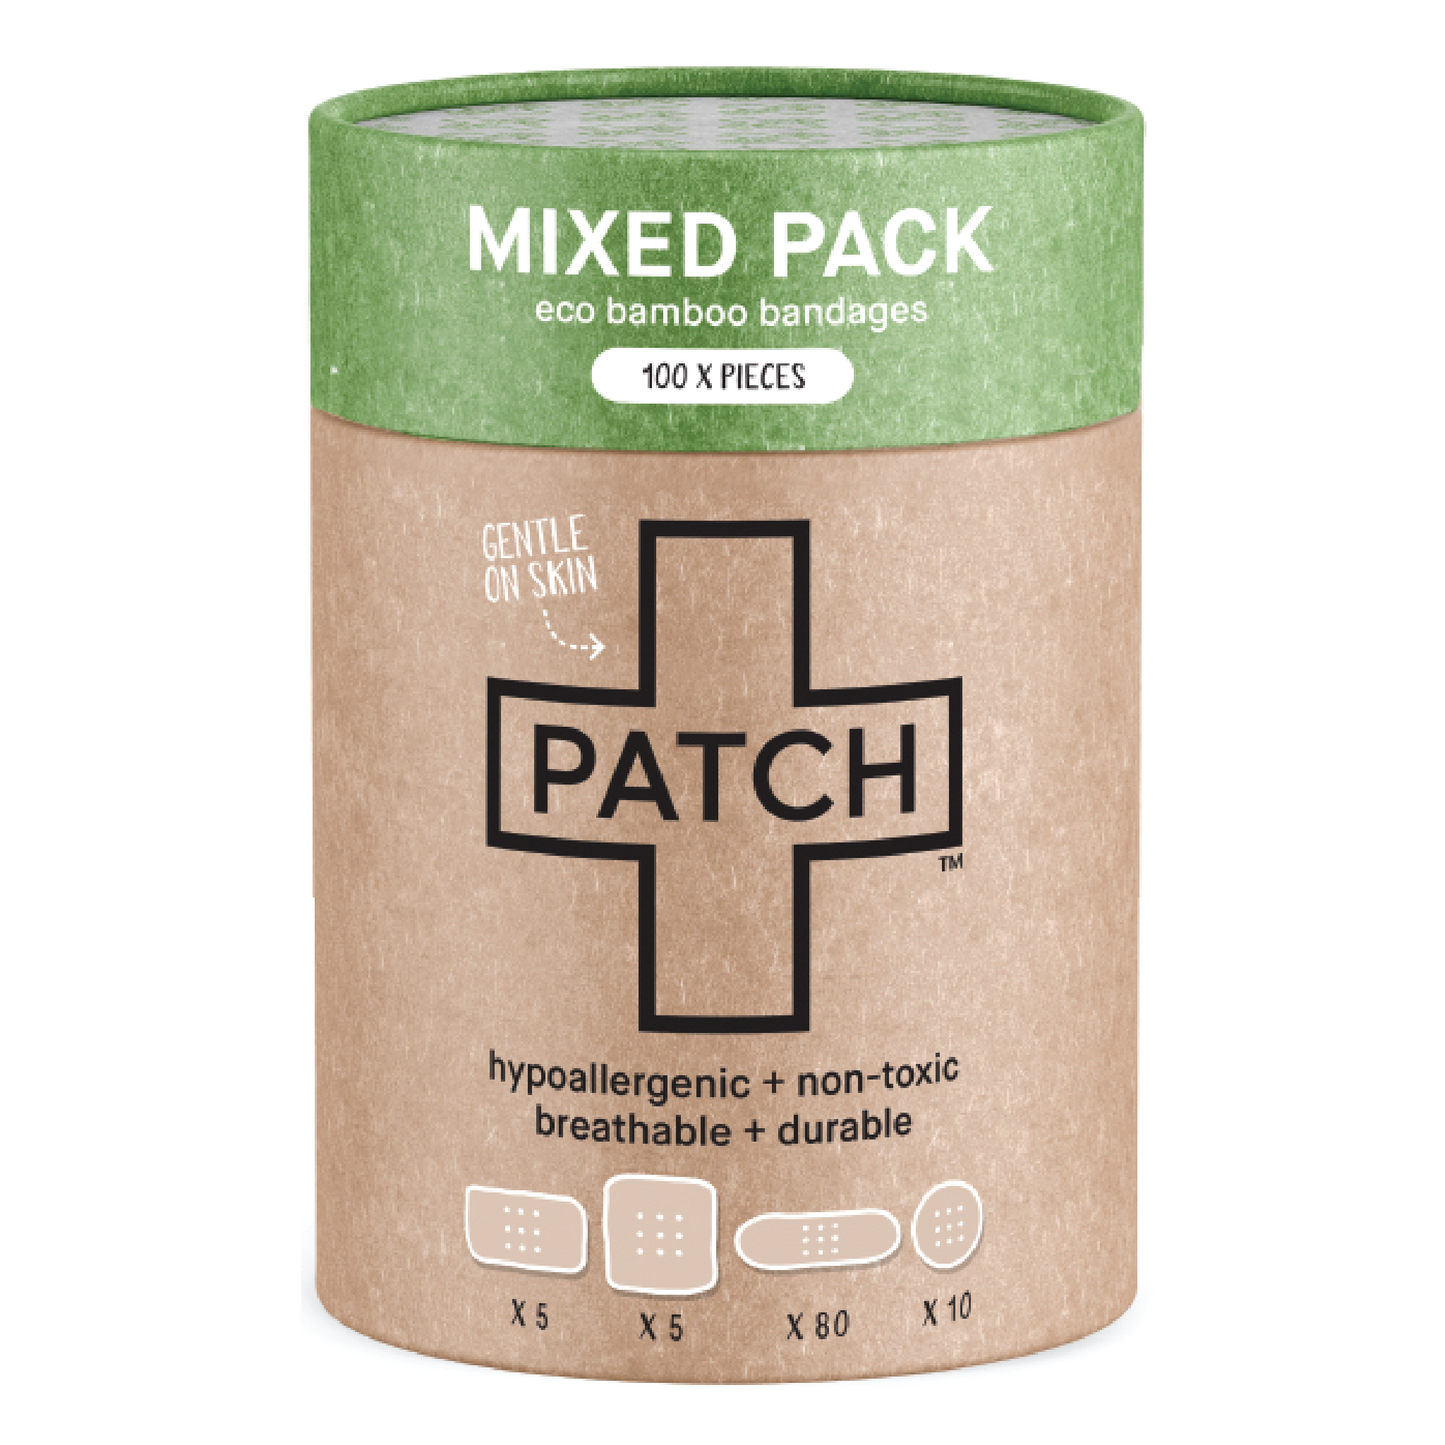 Mixed Pack Patch Bandages eco friendly hypoallergenic non-toxic durable